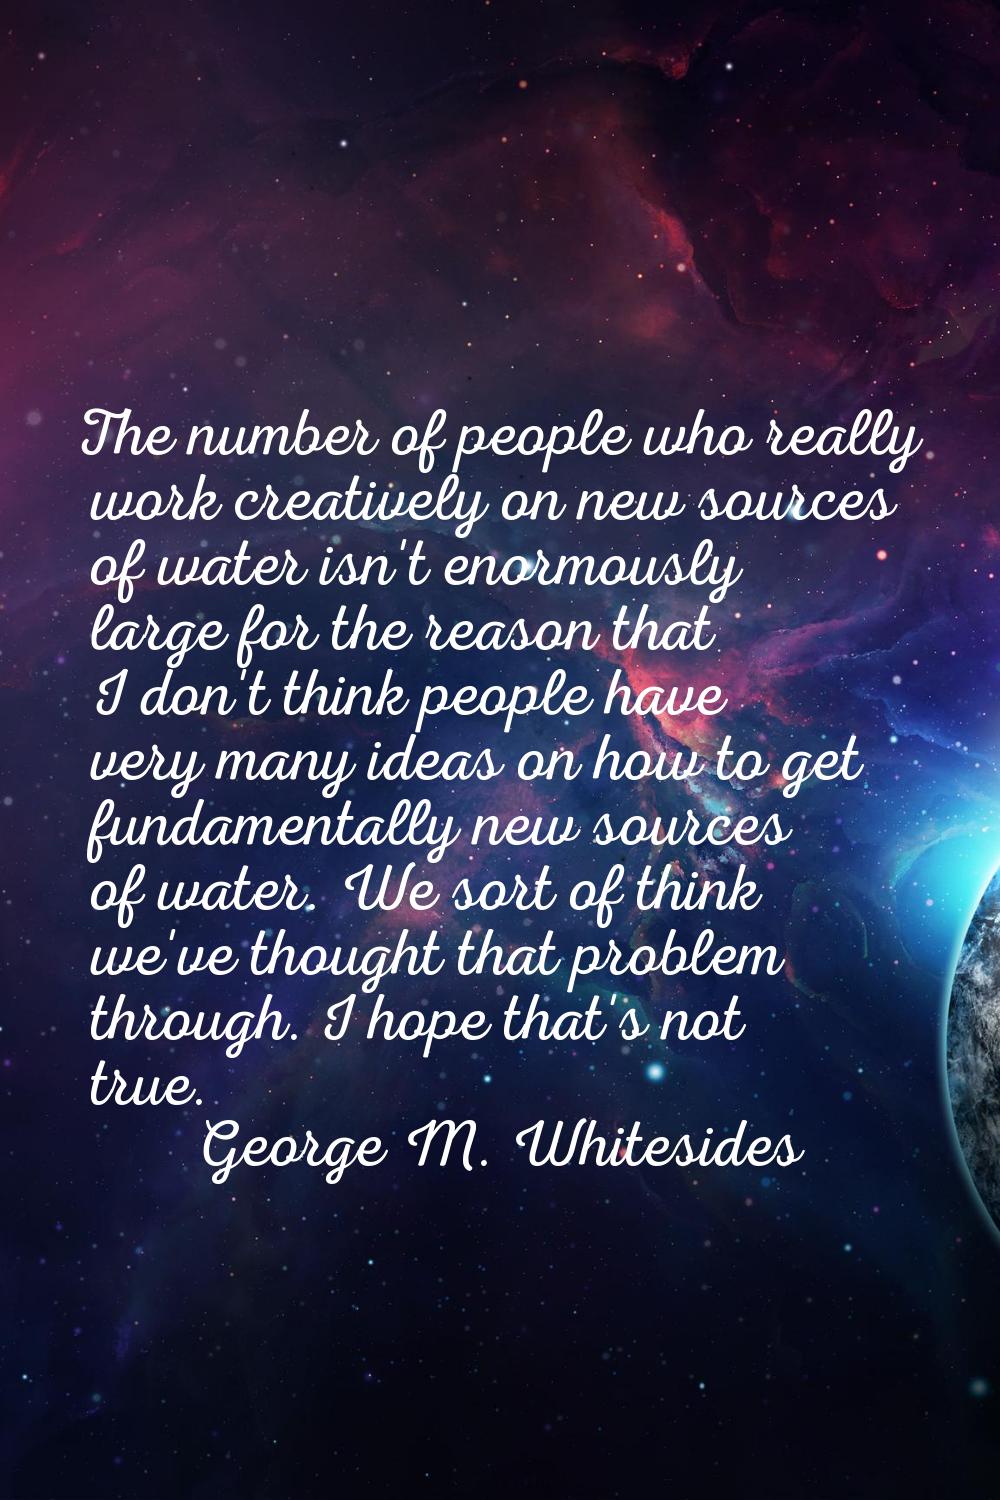 The number of people who really work creatively on new sources of water isn't enormously large for 